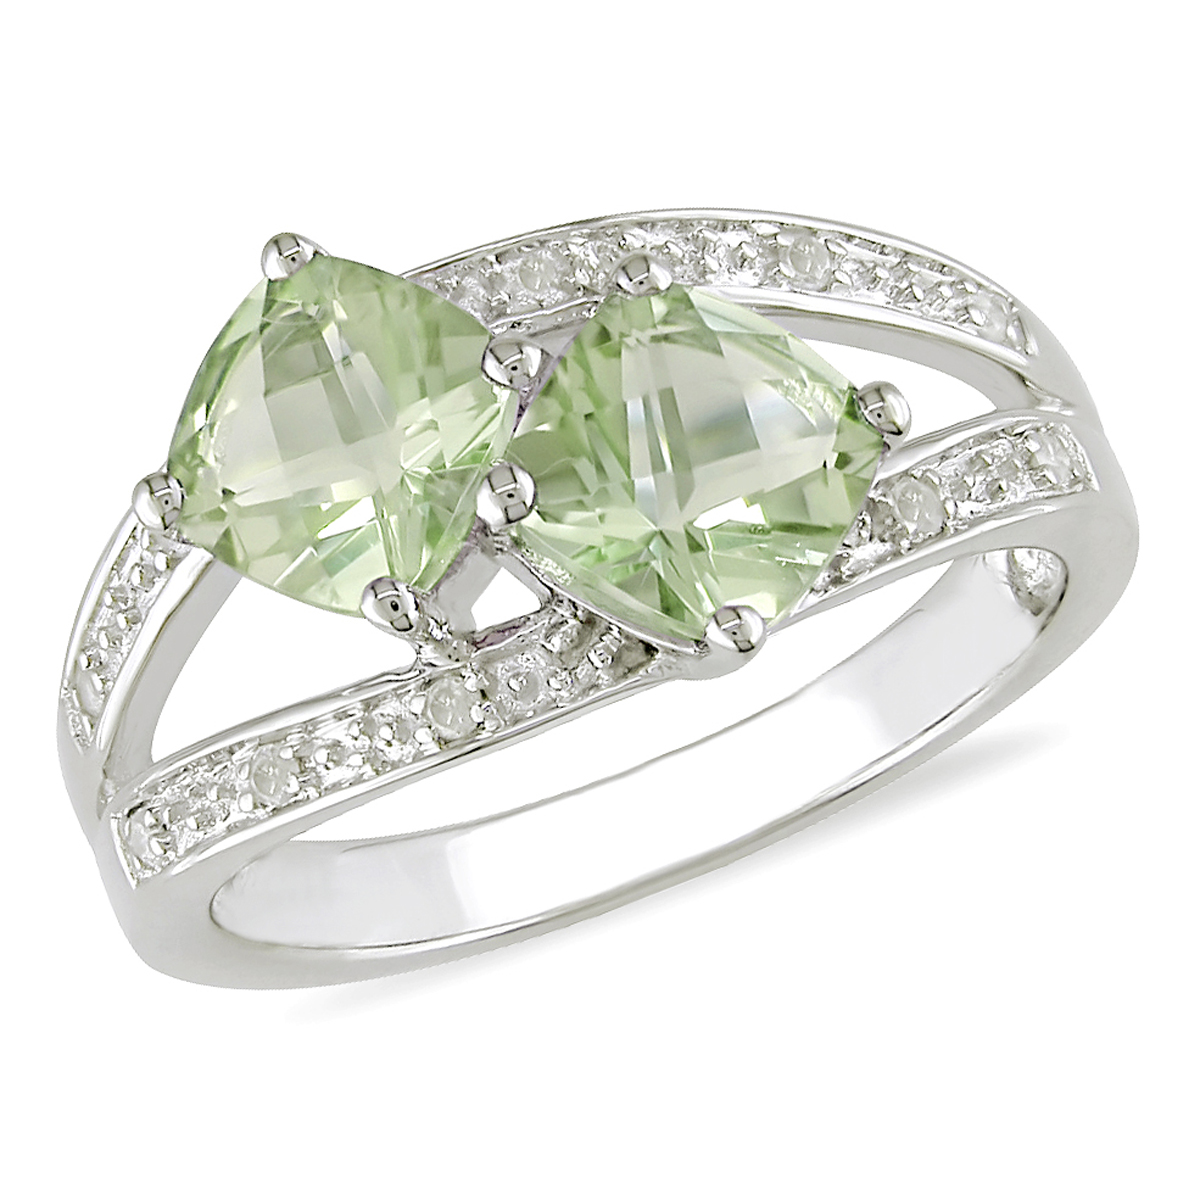 0.05 Carat T.W. Diamond and 1 4/5 Carat T.G.W. Green Amethyst Fashion Ring in Sterling Silver GH I3